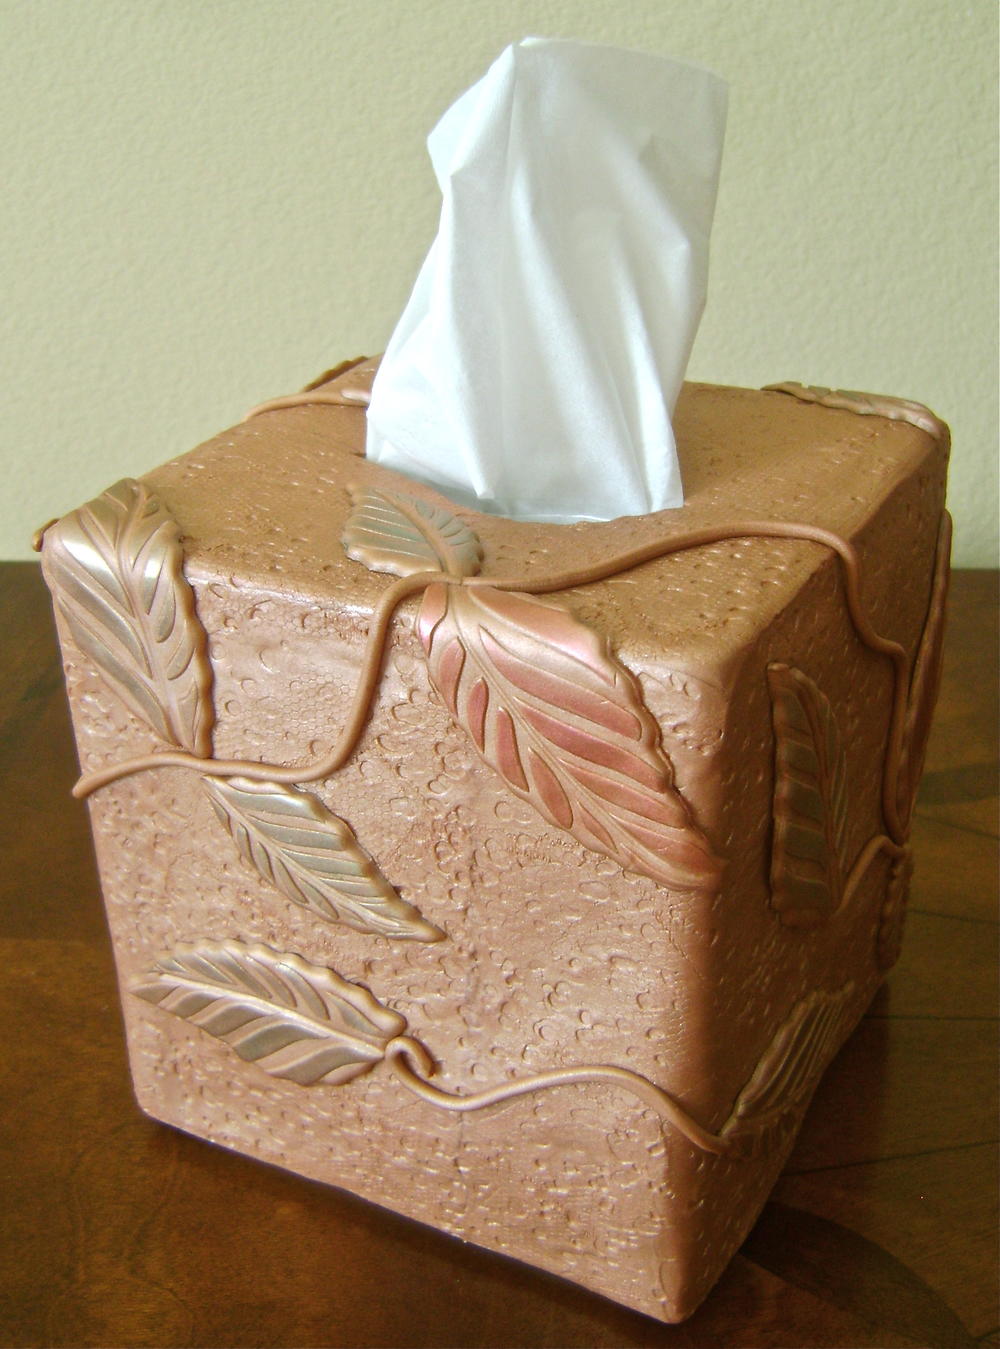 Download Leafy Tissue Box Cover | AllFreeHolidayCrafts.com